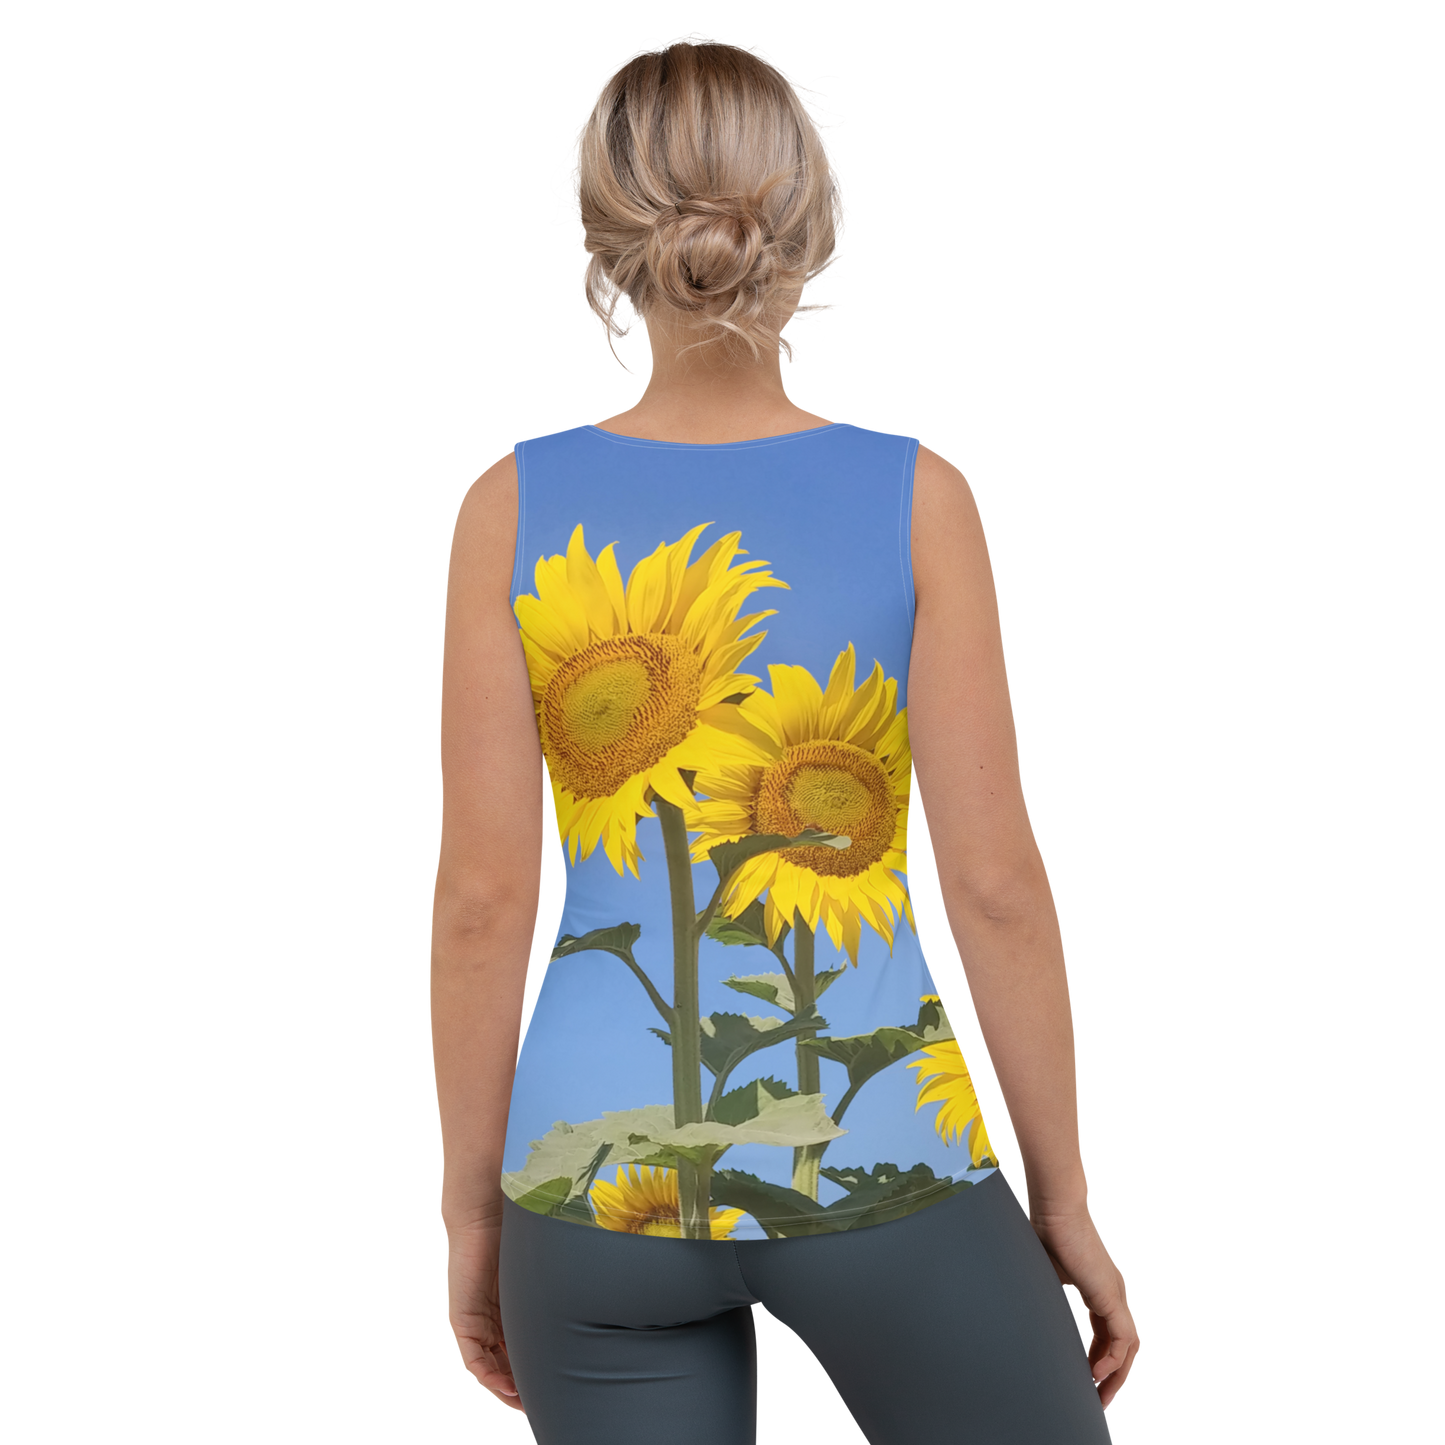 The FLOWER LOVE Collection - "Sunflower Sisters" Design Tank Top